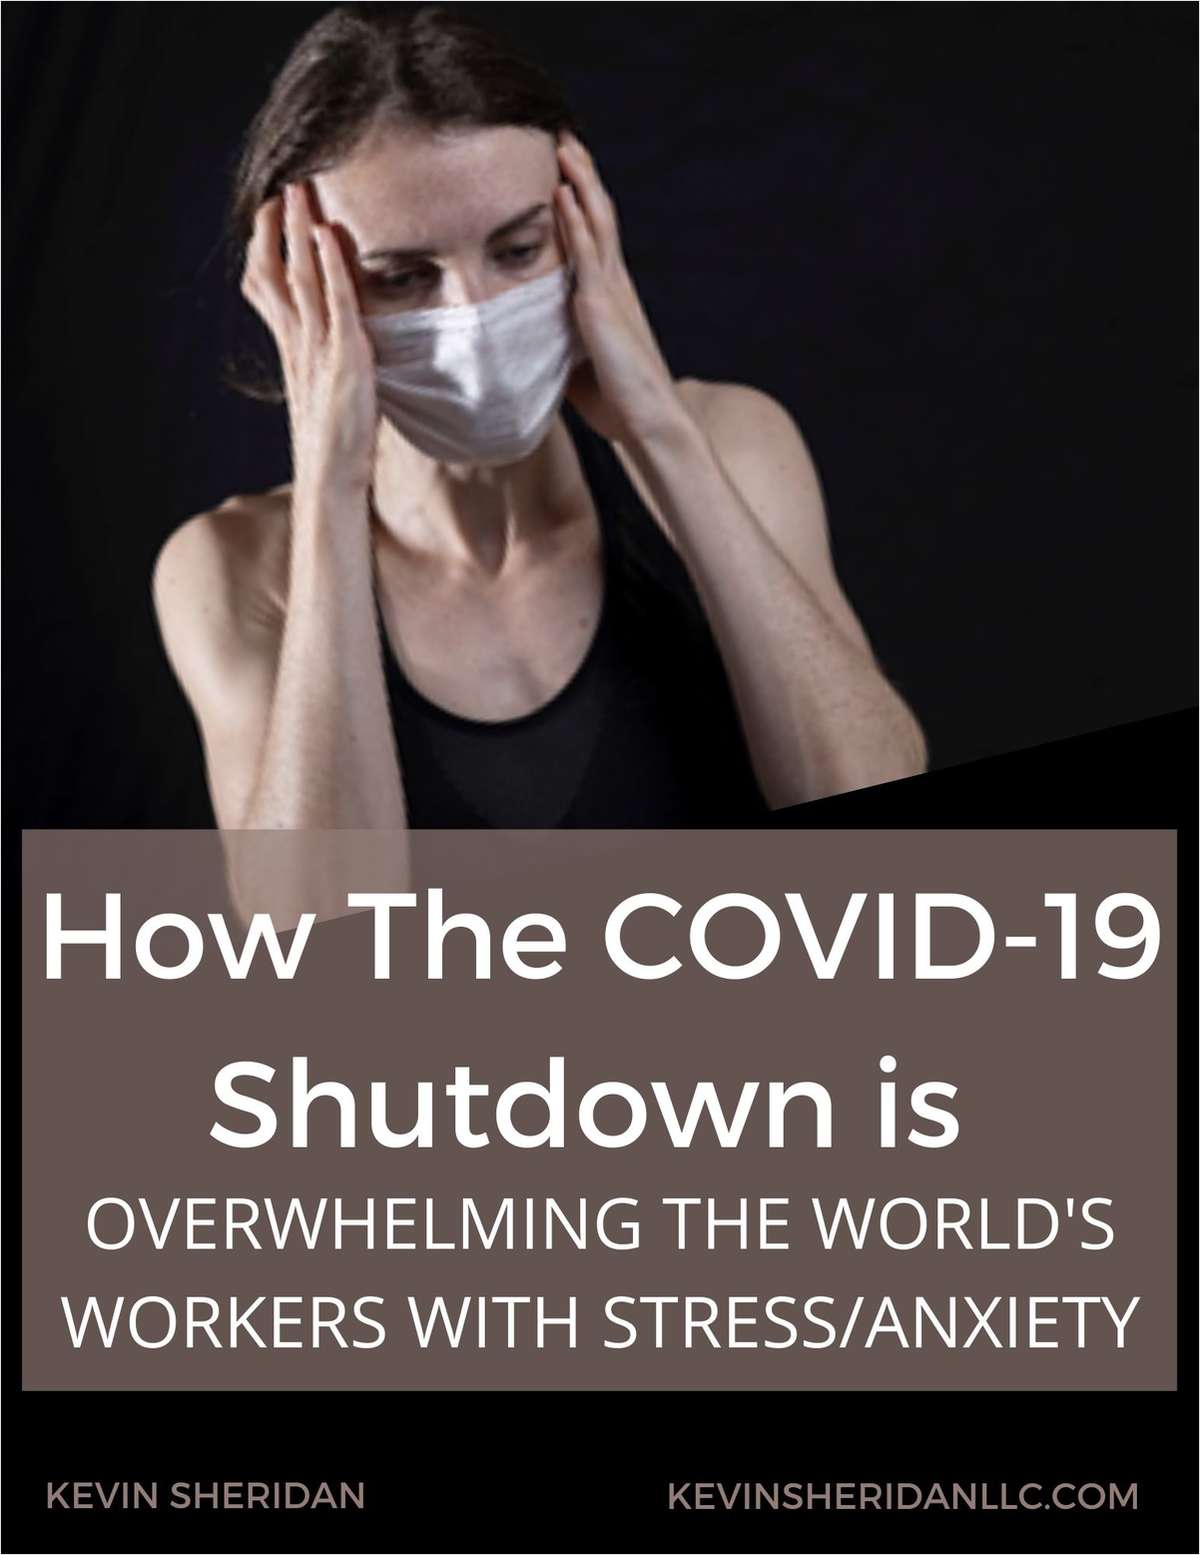 How The COVID-19 Shutdown Is Overwhelming The World's Workers With Stress/Anxiety